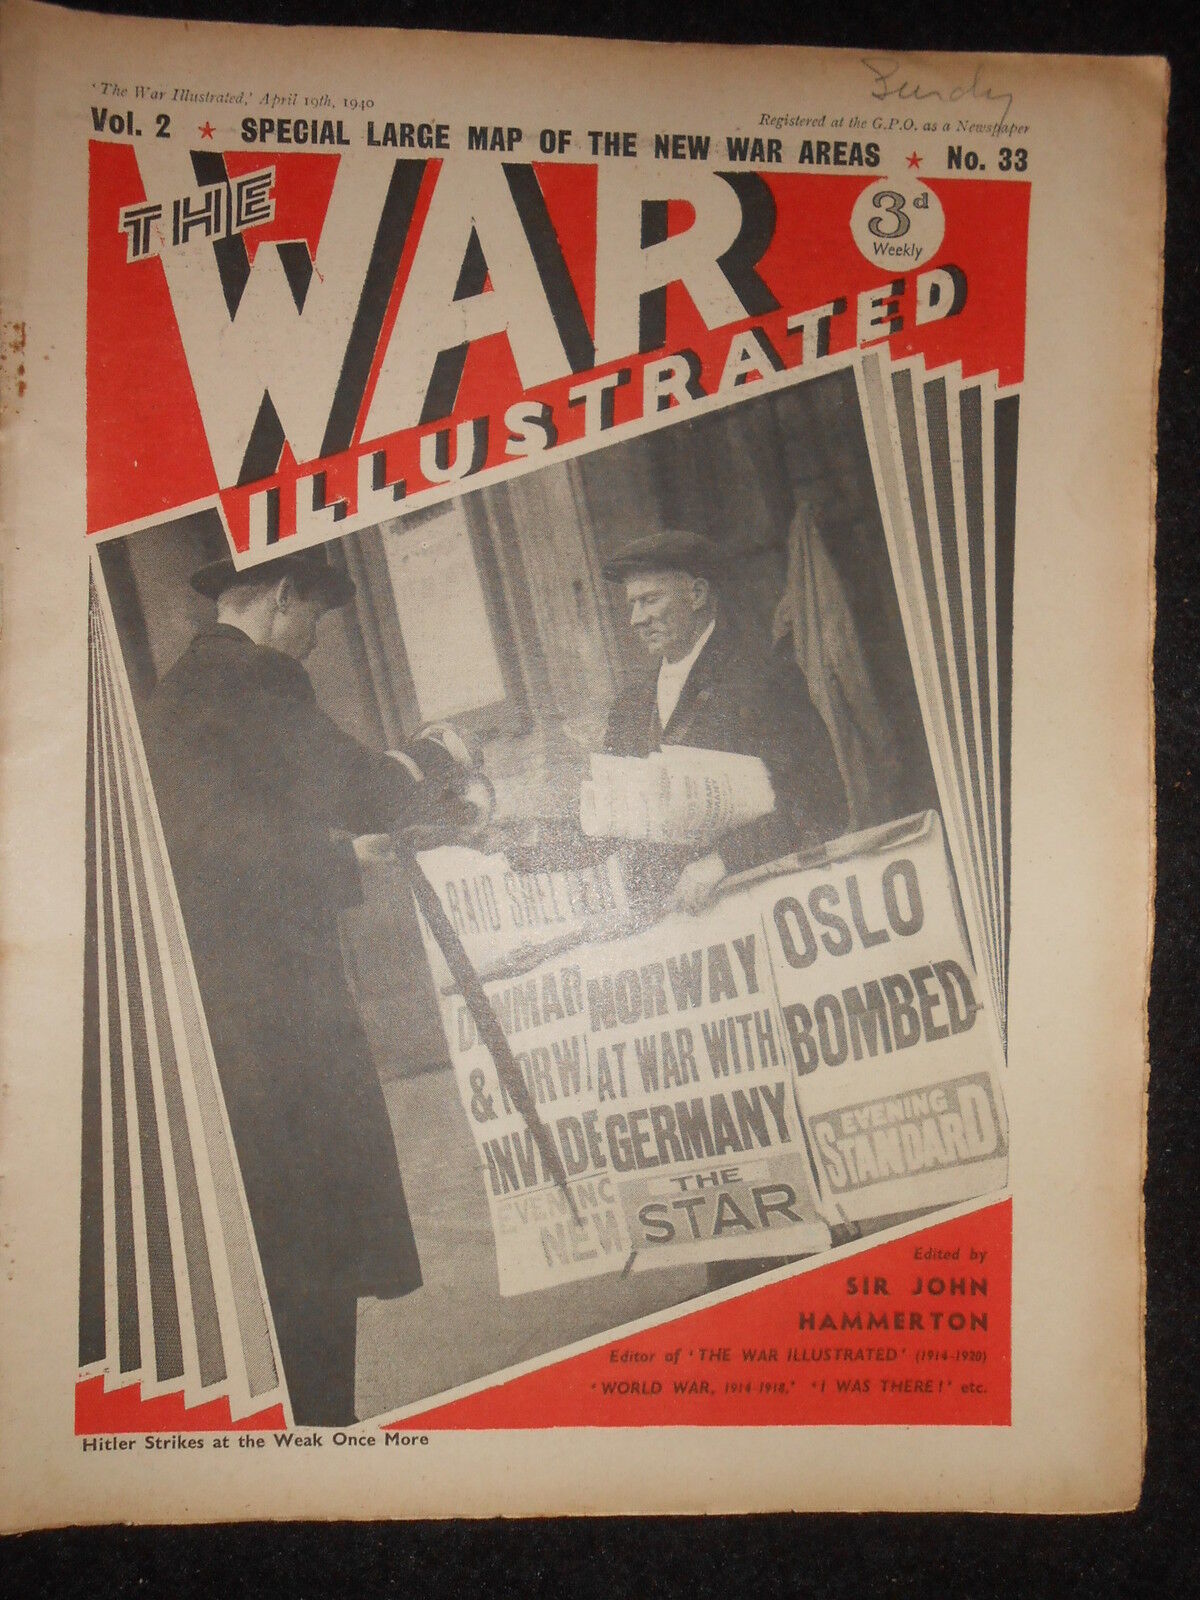 THE WAR ILLUSTRATED; Vintage WWII Magazine - Volume 2, No 33 - April 19th 1940